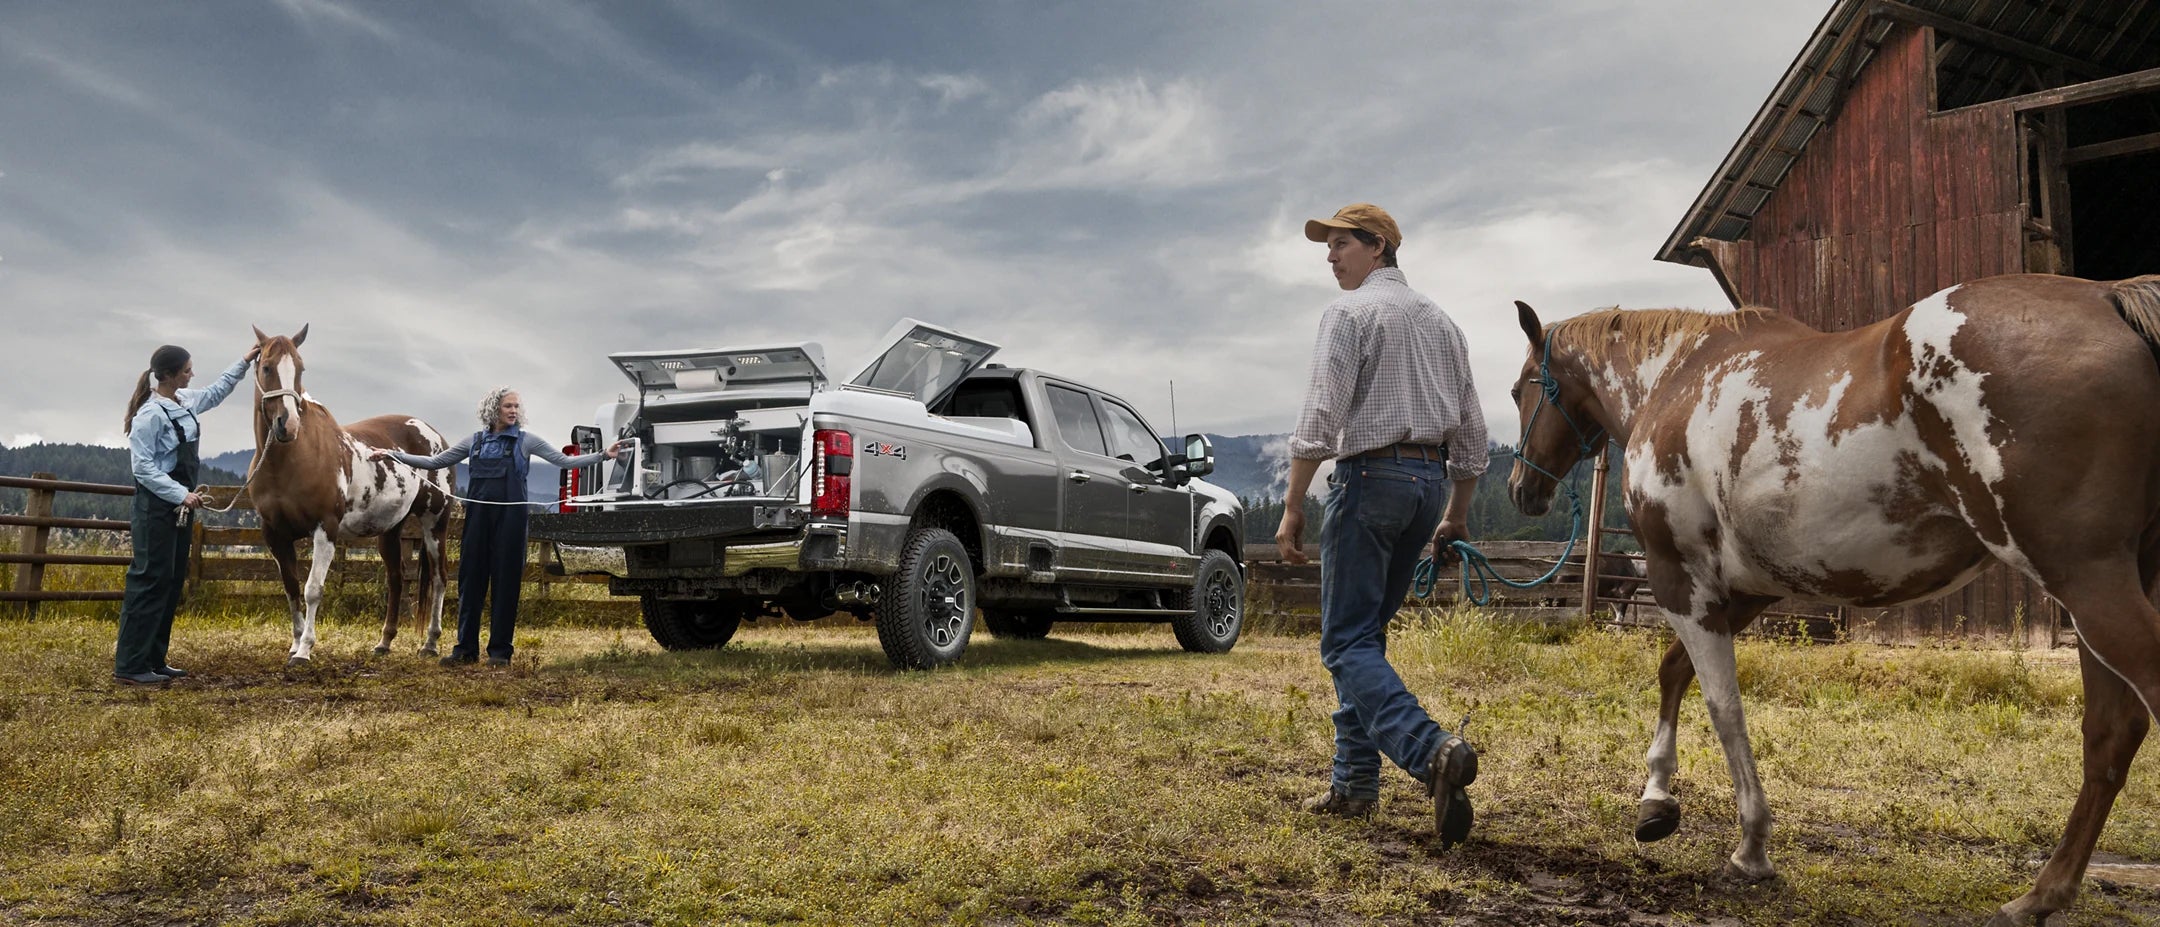 The all-new Ford Super Duty at Power Ford in Albuquerque, New Mexico is the truck that has everything.